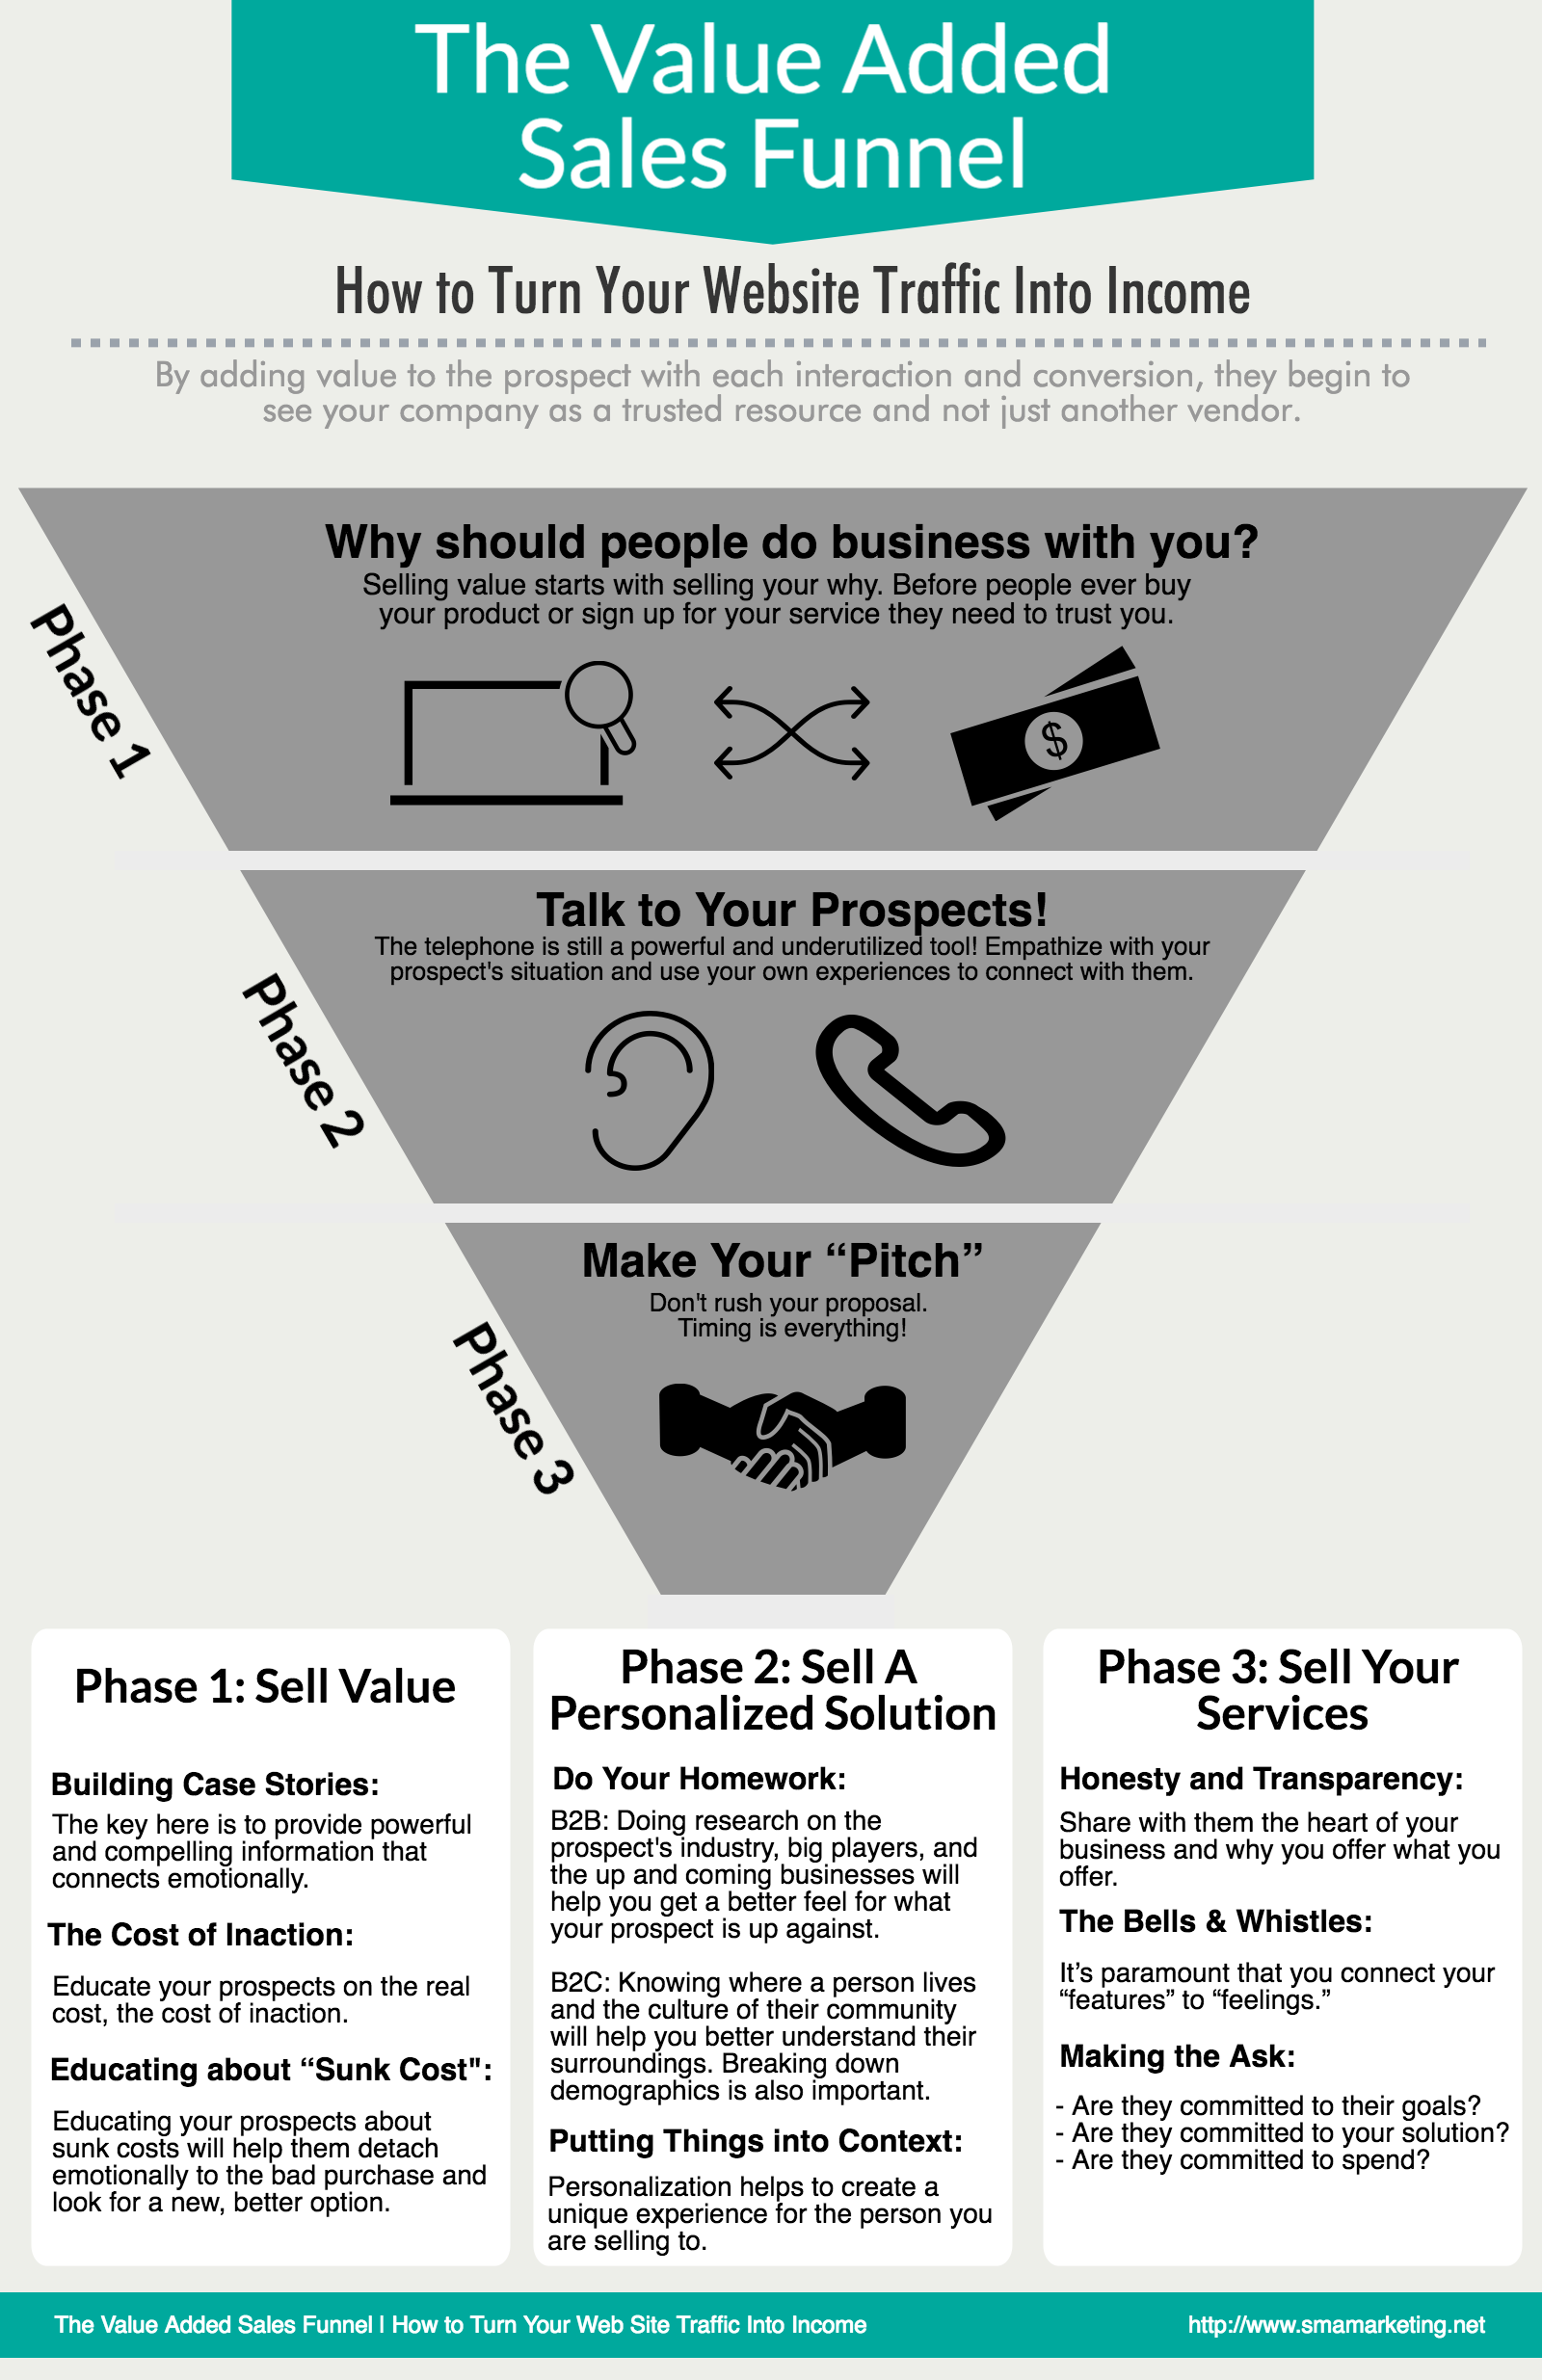 The Value Added Sales Funnel - How to Turn Your Web Site Traffic Into Income